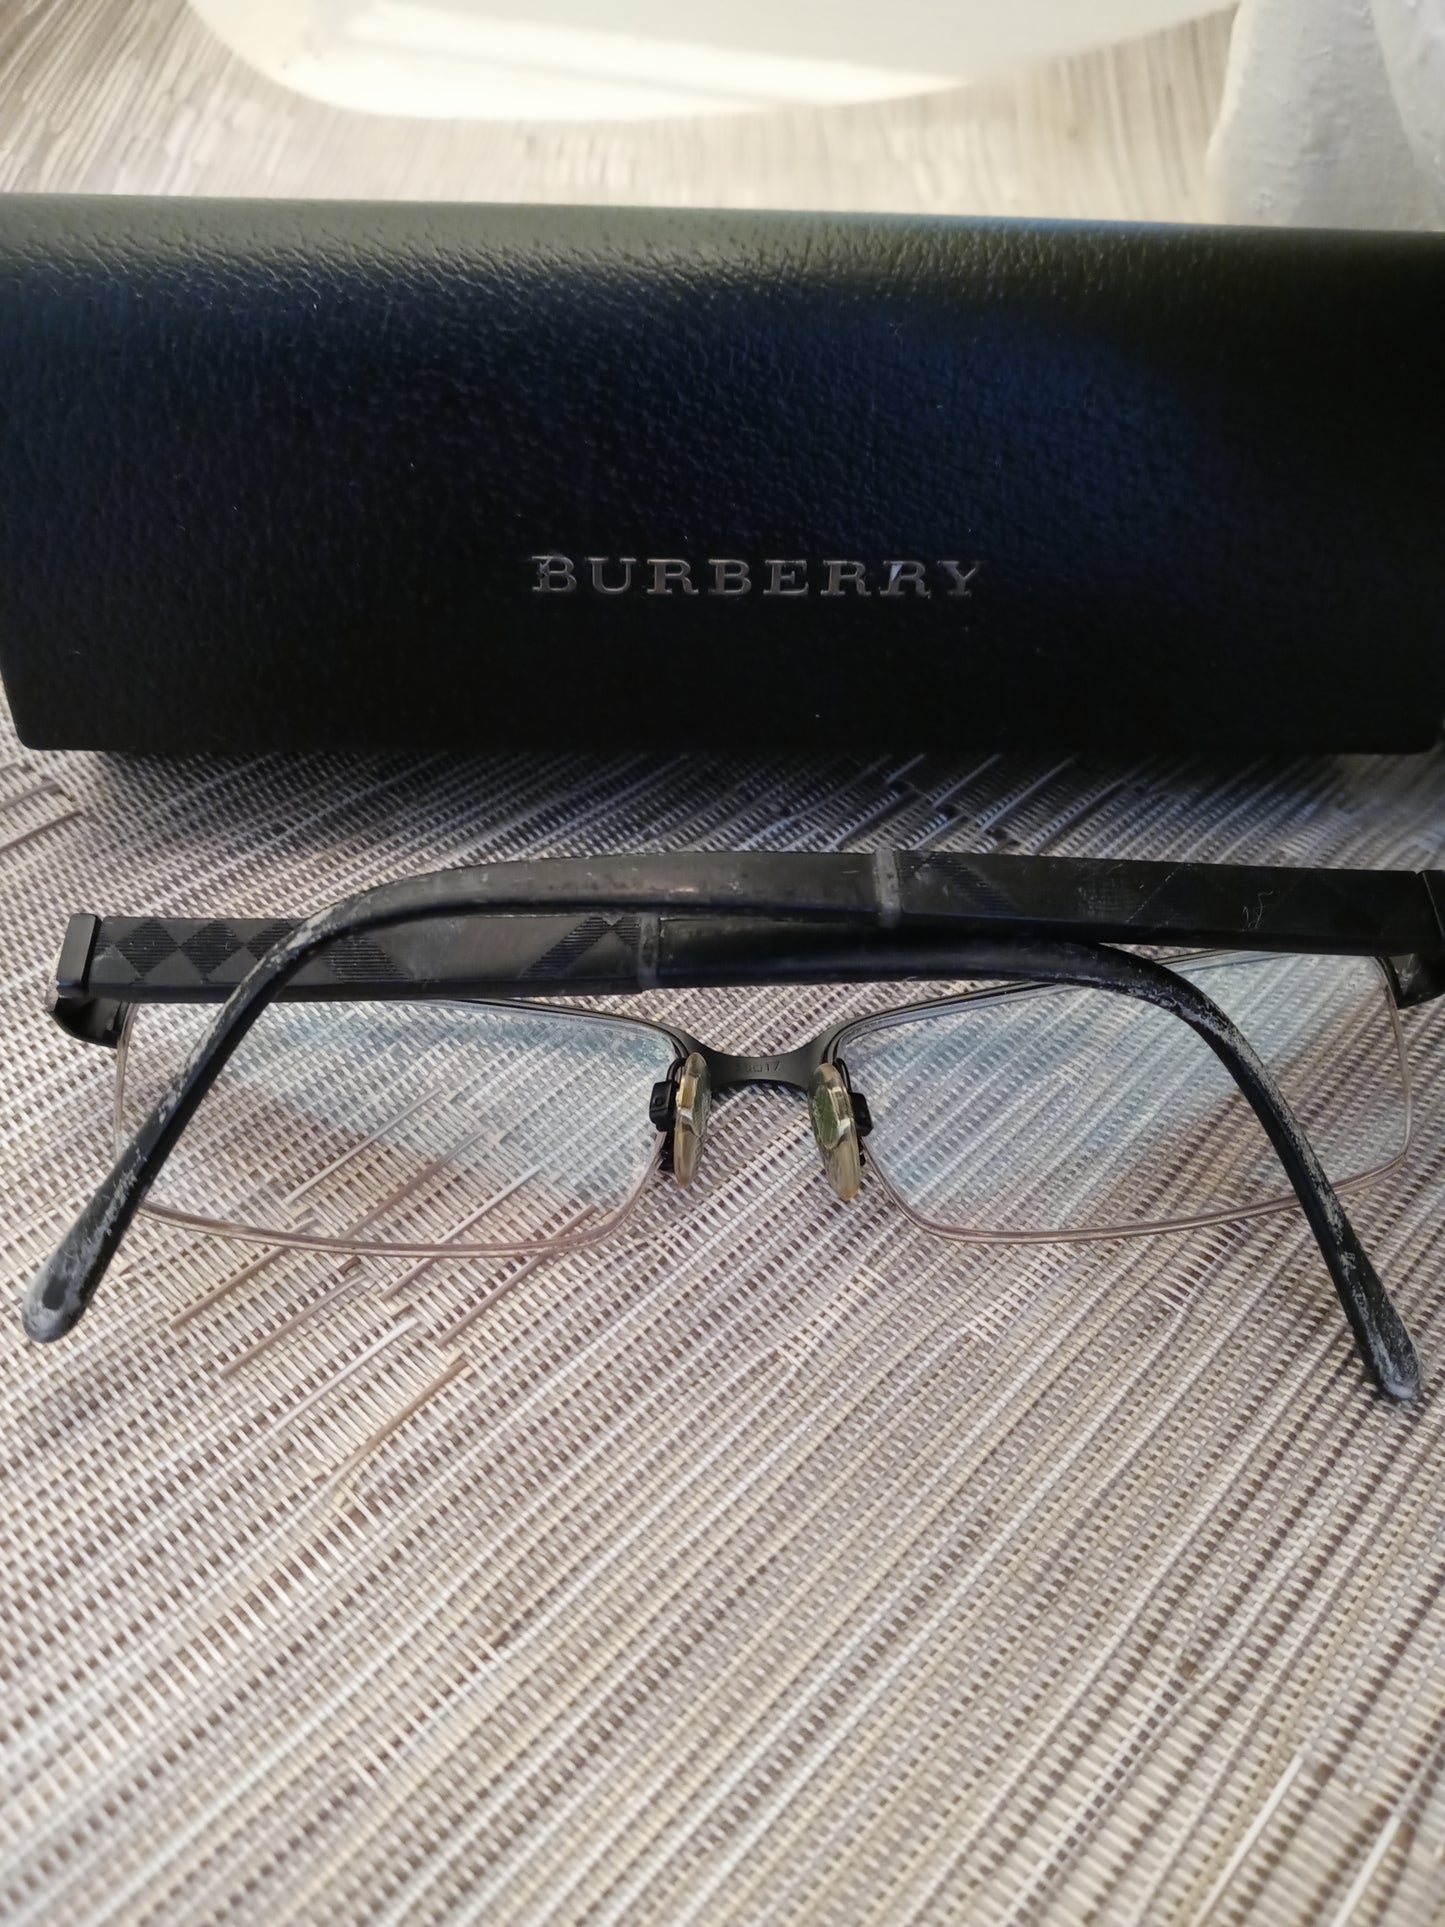 Burberry Glasses Pre Owned Not Sure If They Are Unisex - Fair Condition